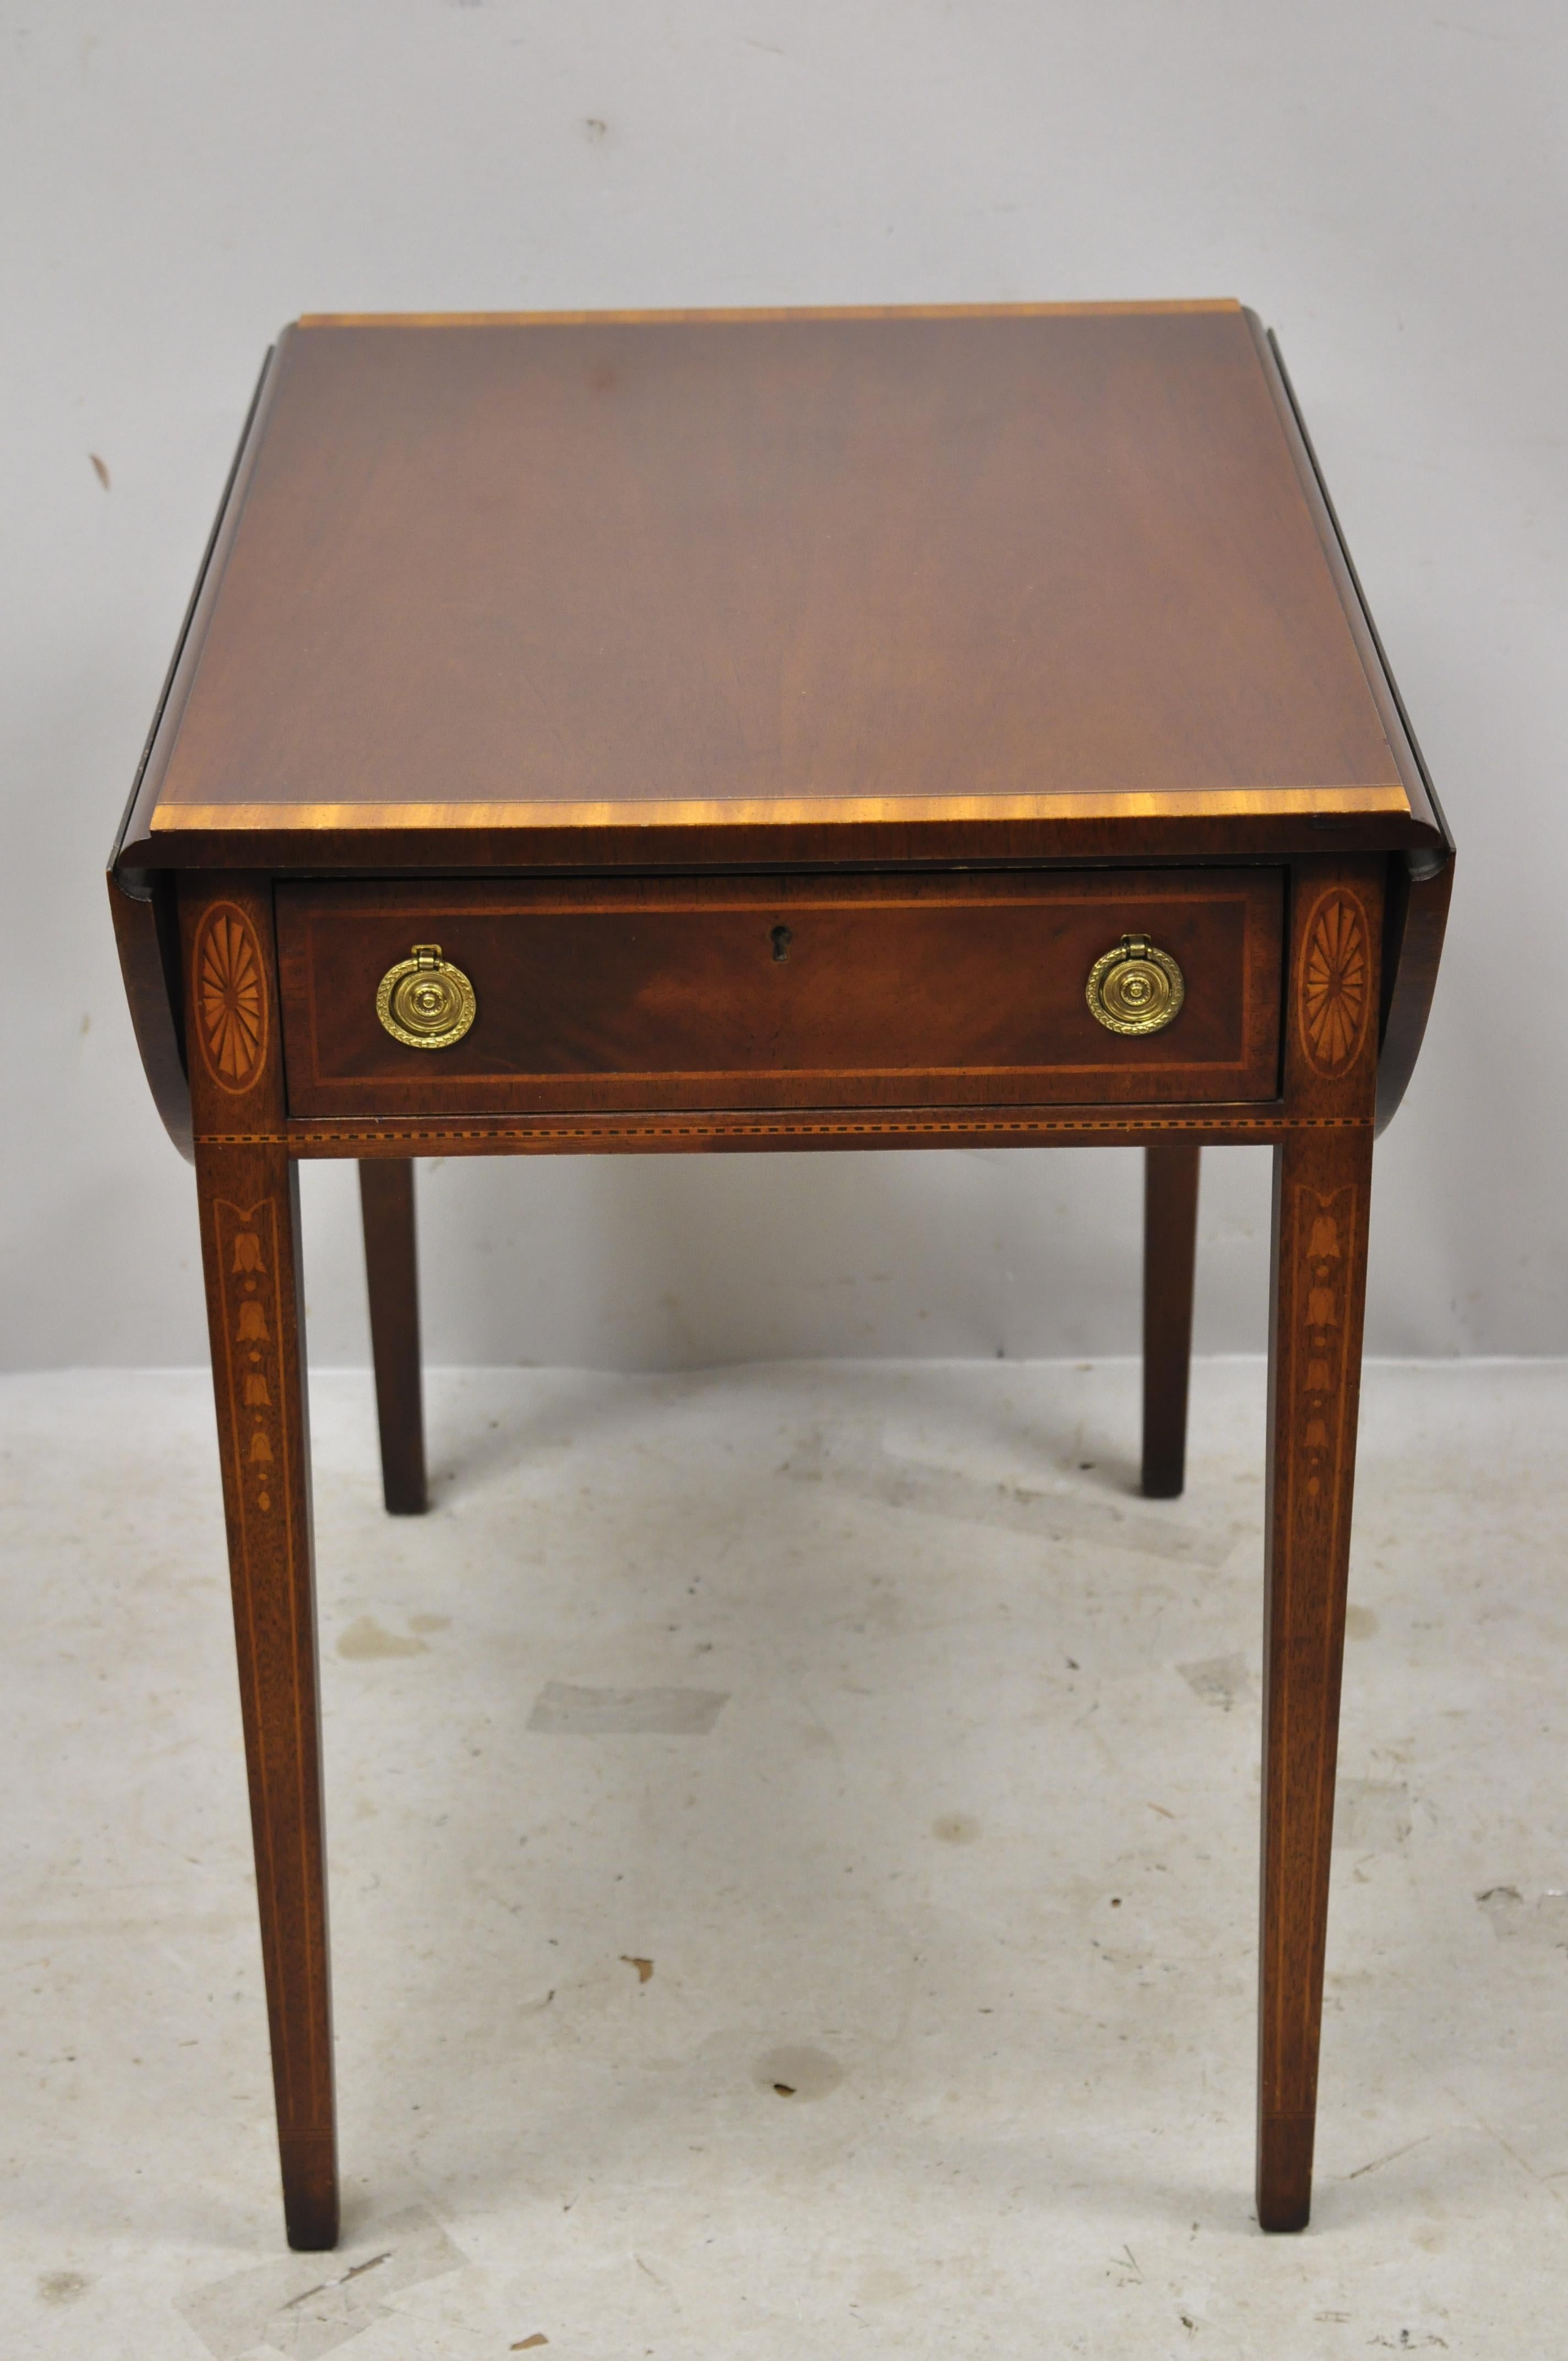 Wellington hall federal mahogany Pembroke lamp end table drop-leaf pinwheel inlay. Item features banded top, satinwood pinwheel and bell flower inlay, drop-leaf sides, beautiful wood grain, original label, 1 dovetailed drawer, tapered legs, solid